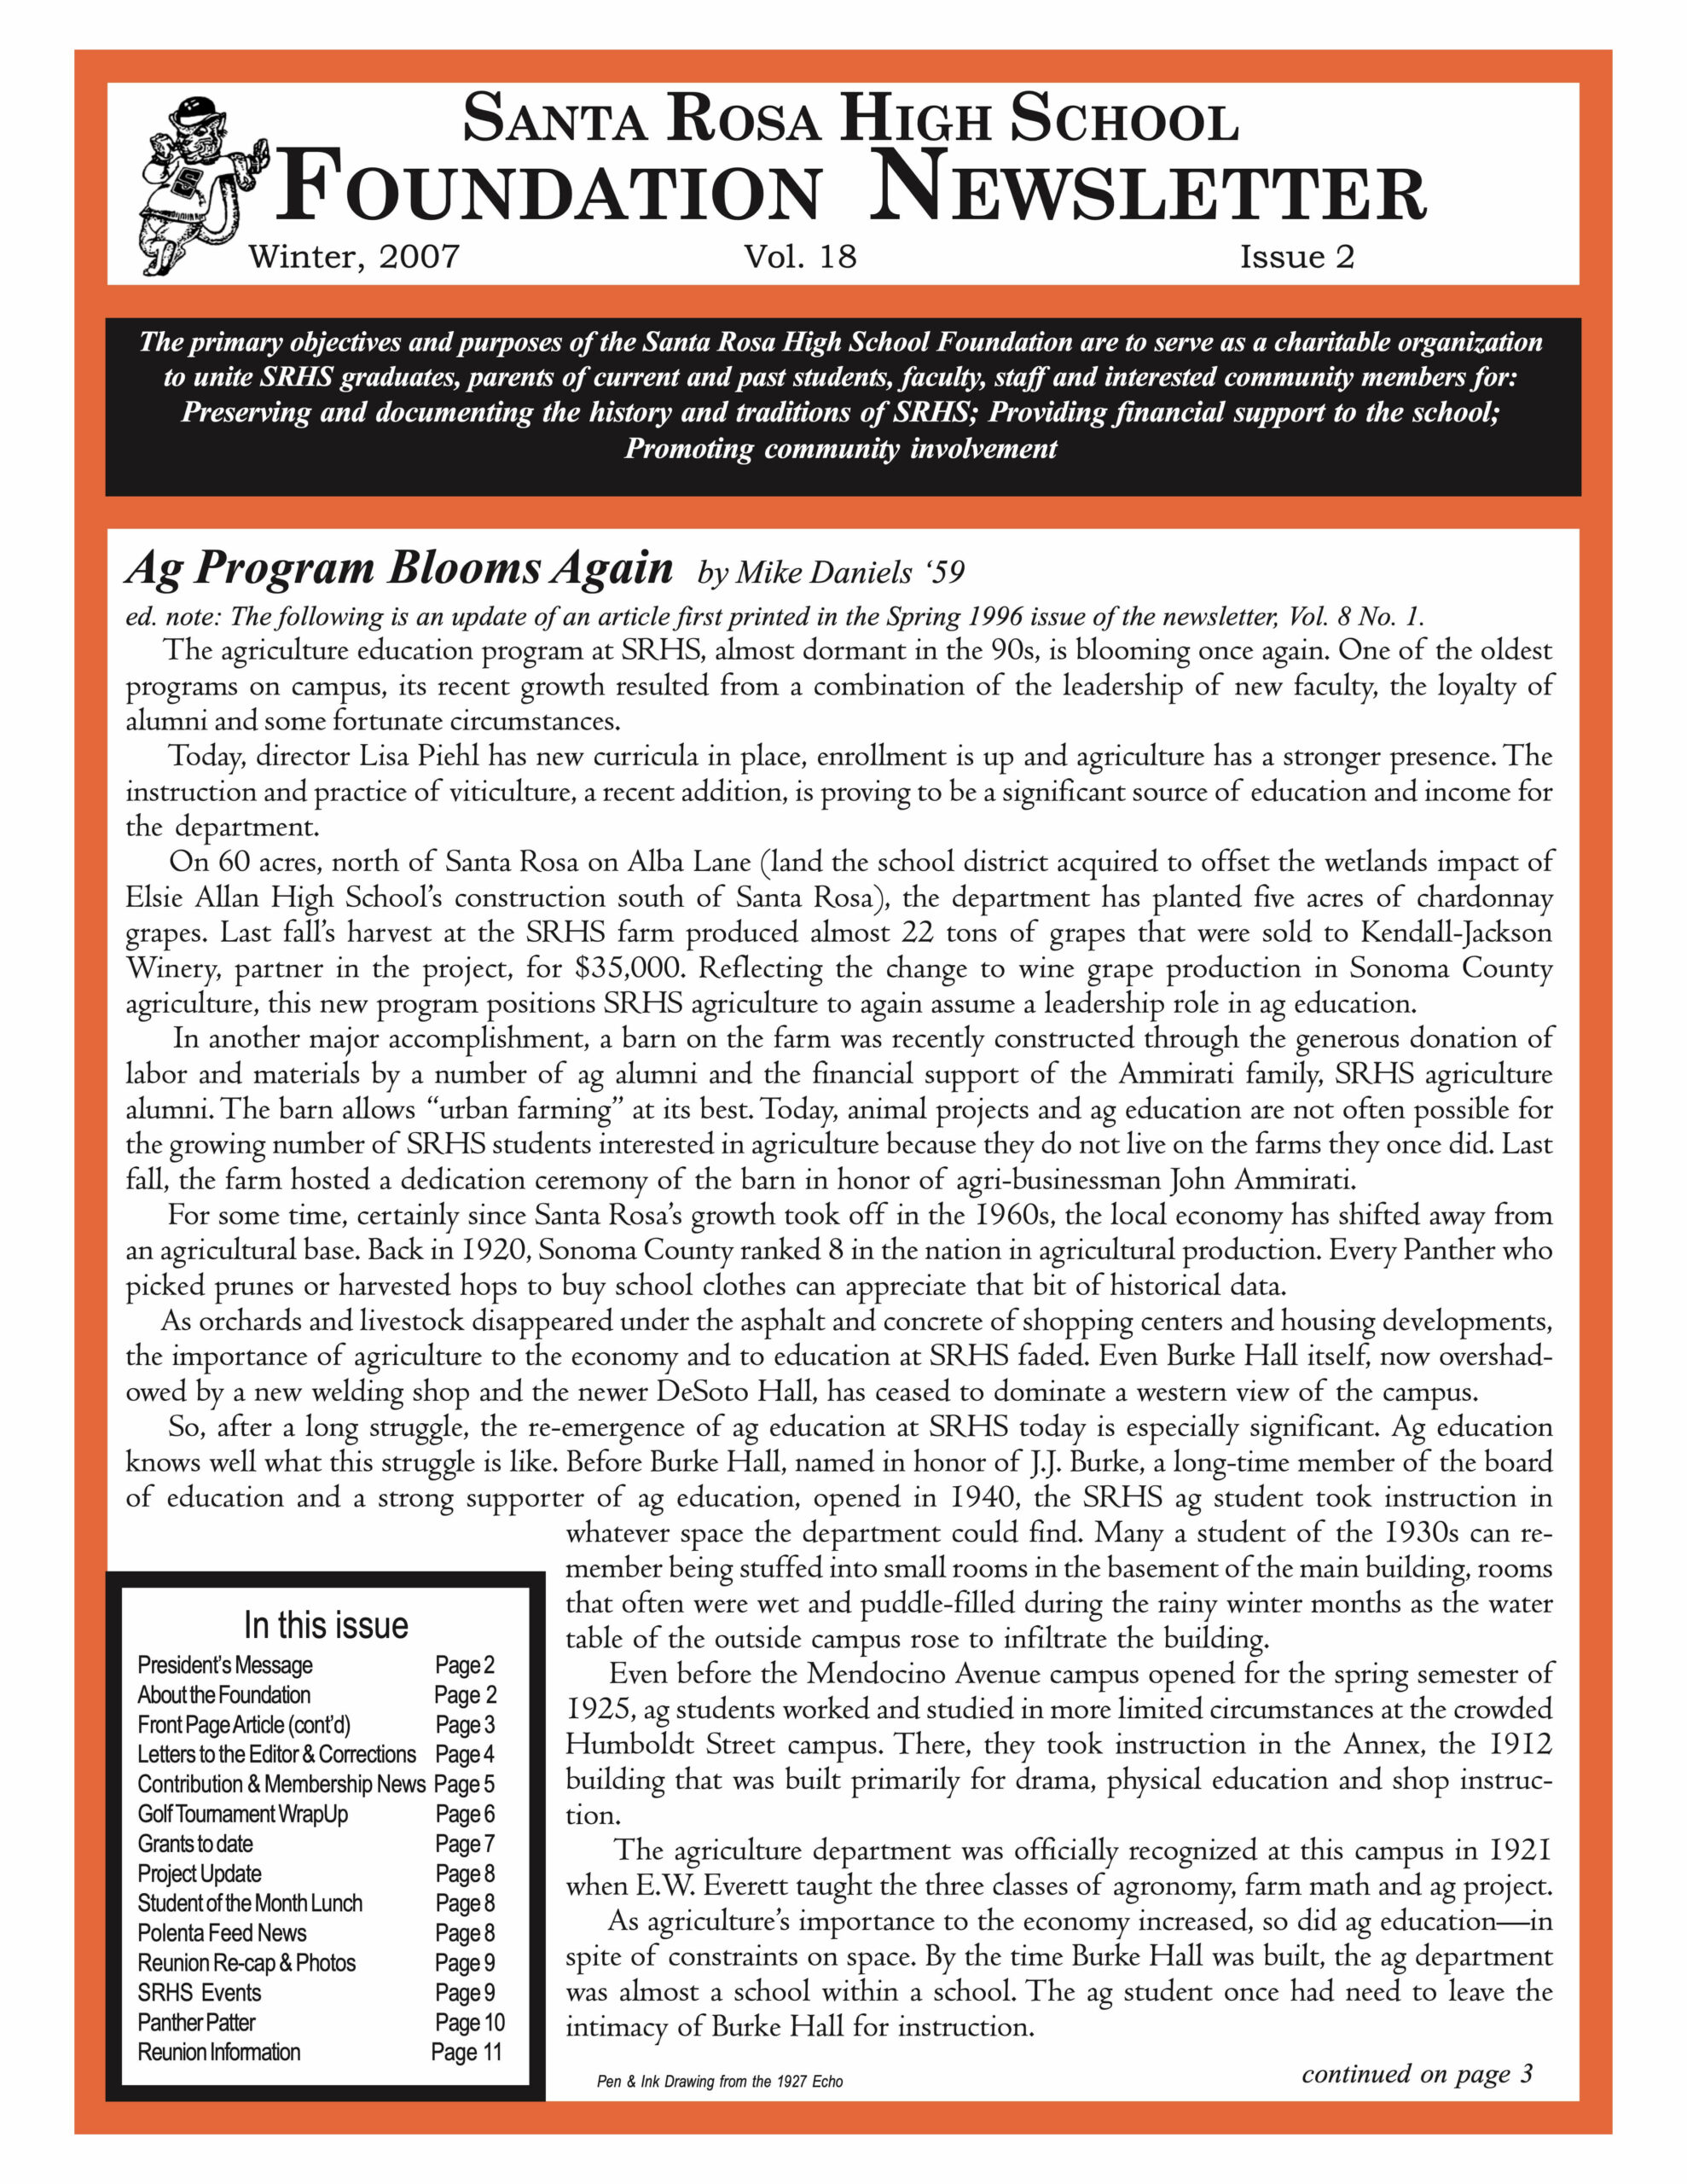 Newsletter front page - Winter 2007